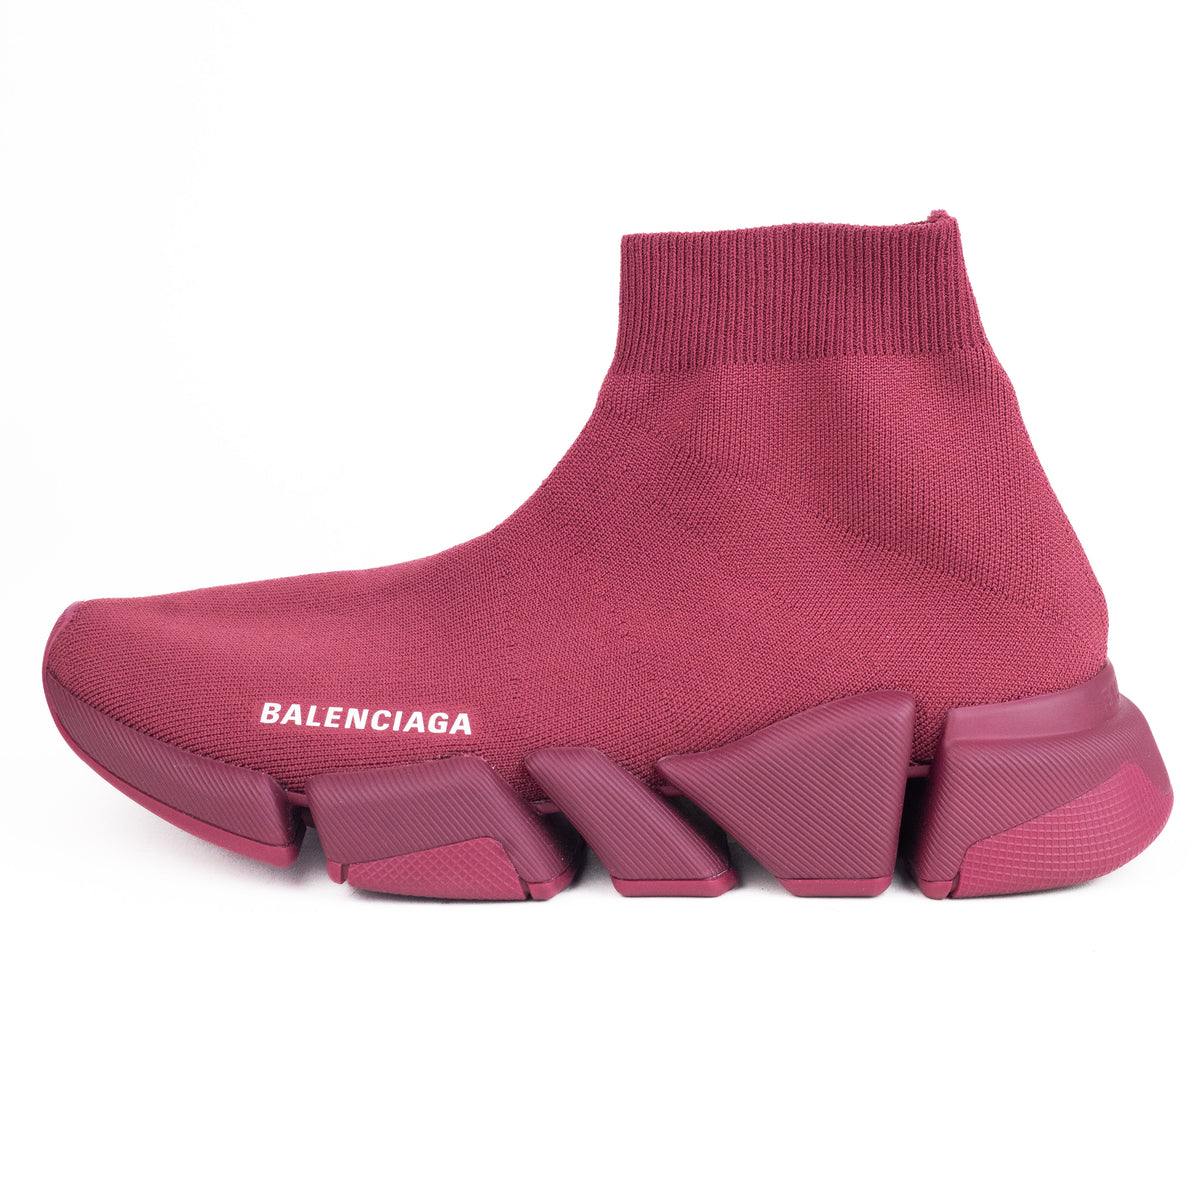 Balenciaga Race Runner trainers 635  liked on Polyvore featuring shoes  sneakers white pointed shoes p  Burgundy shoes Balenciaga race runner  Pointy shoes